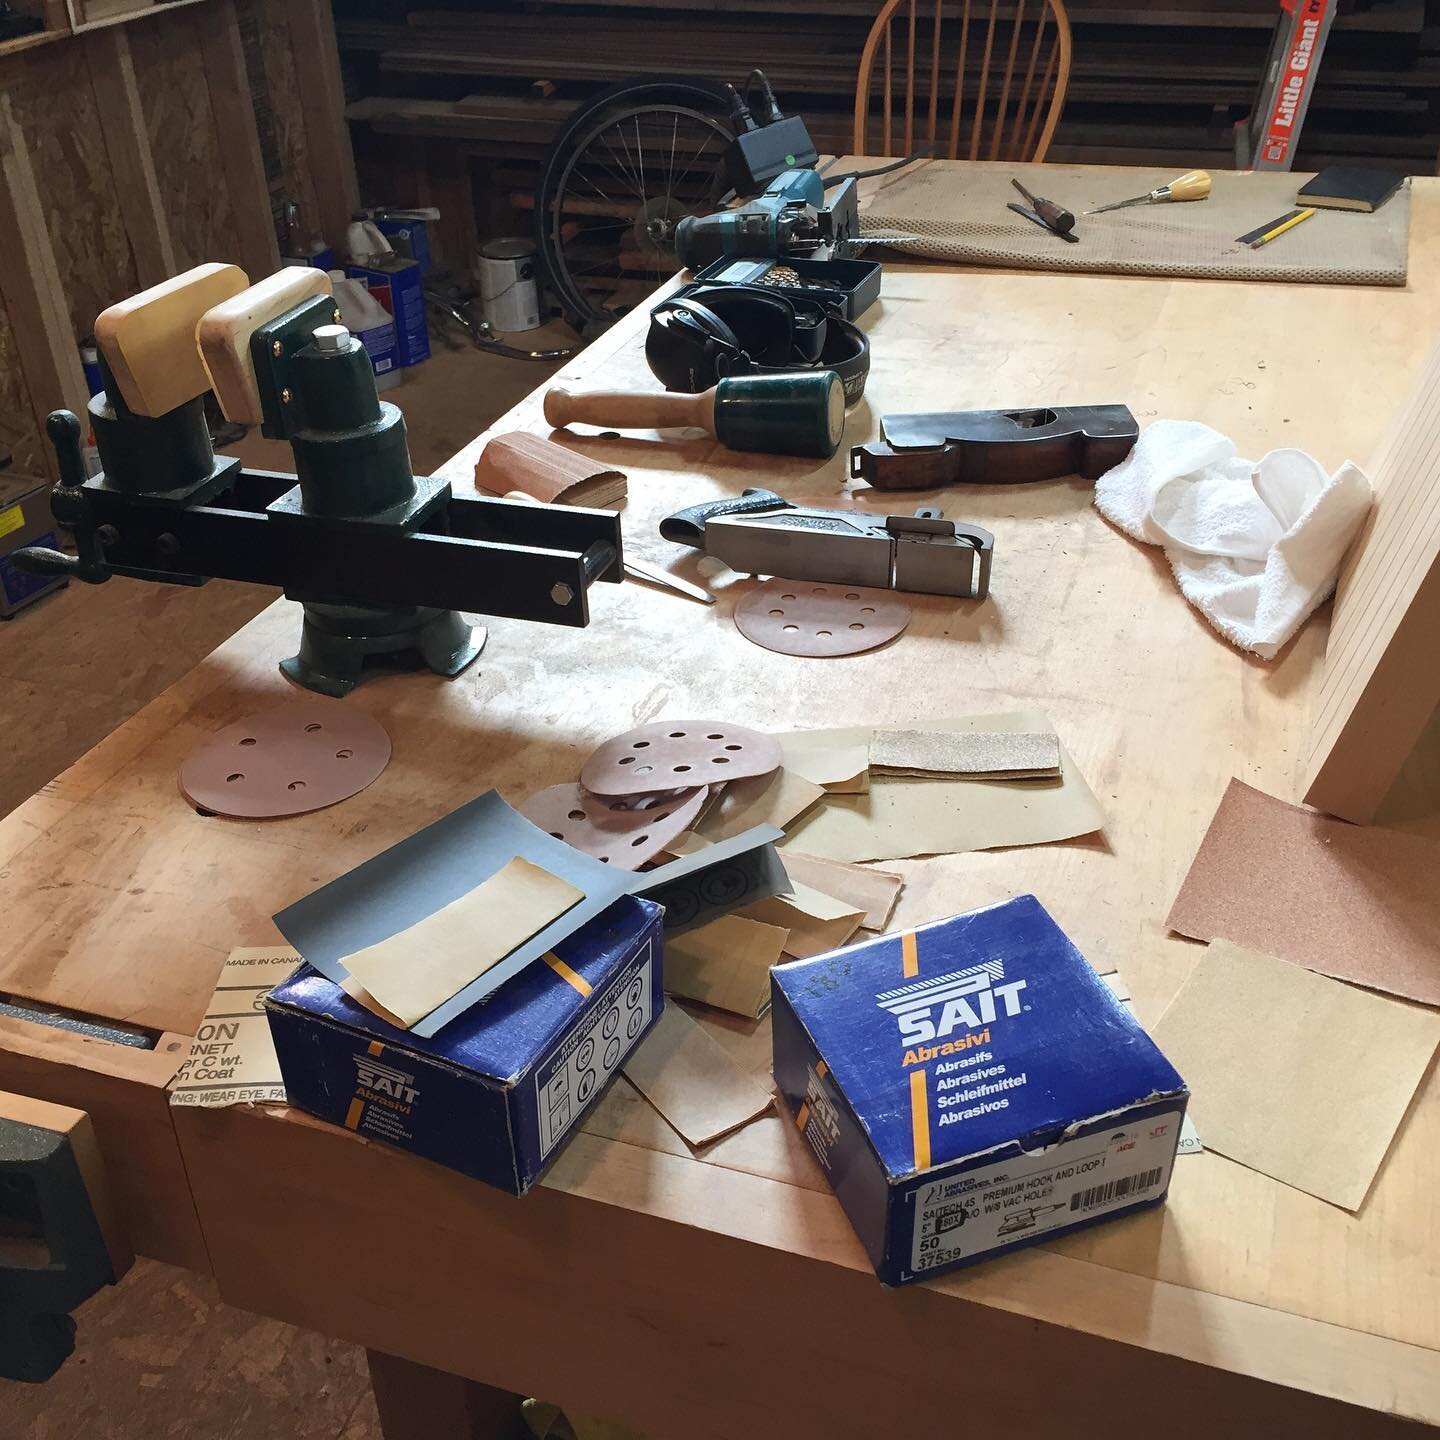 After half an hour of working on a chair, my bench looks like this ... That&rsquo;s way to many different sorts of tools. What have I been doing?!What kind of woodworker am I?! In the end, I just clean up and get back to work.
#handplanefest #8Branch